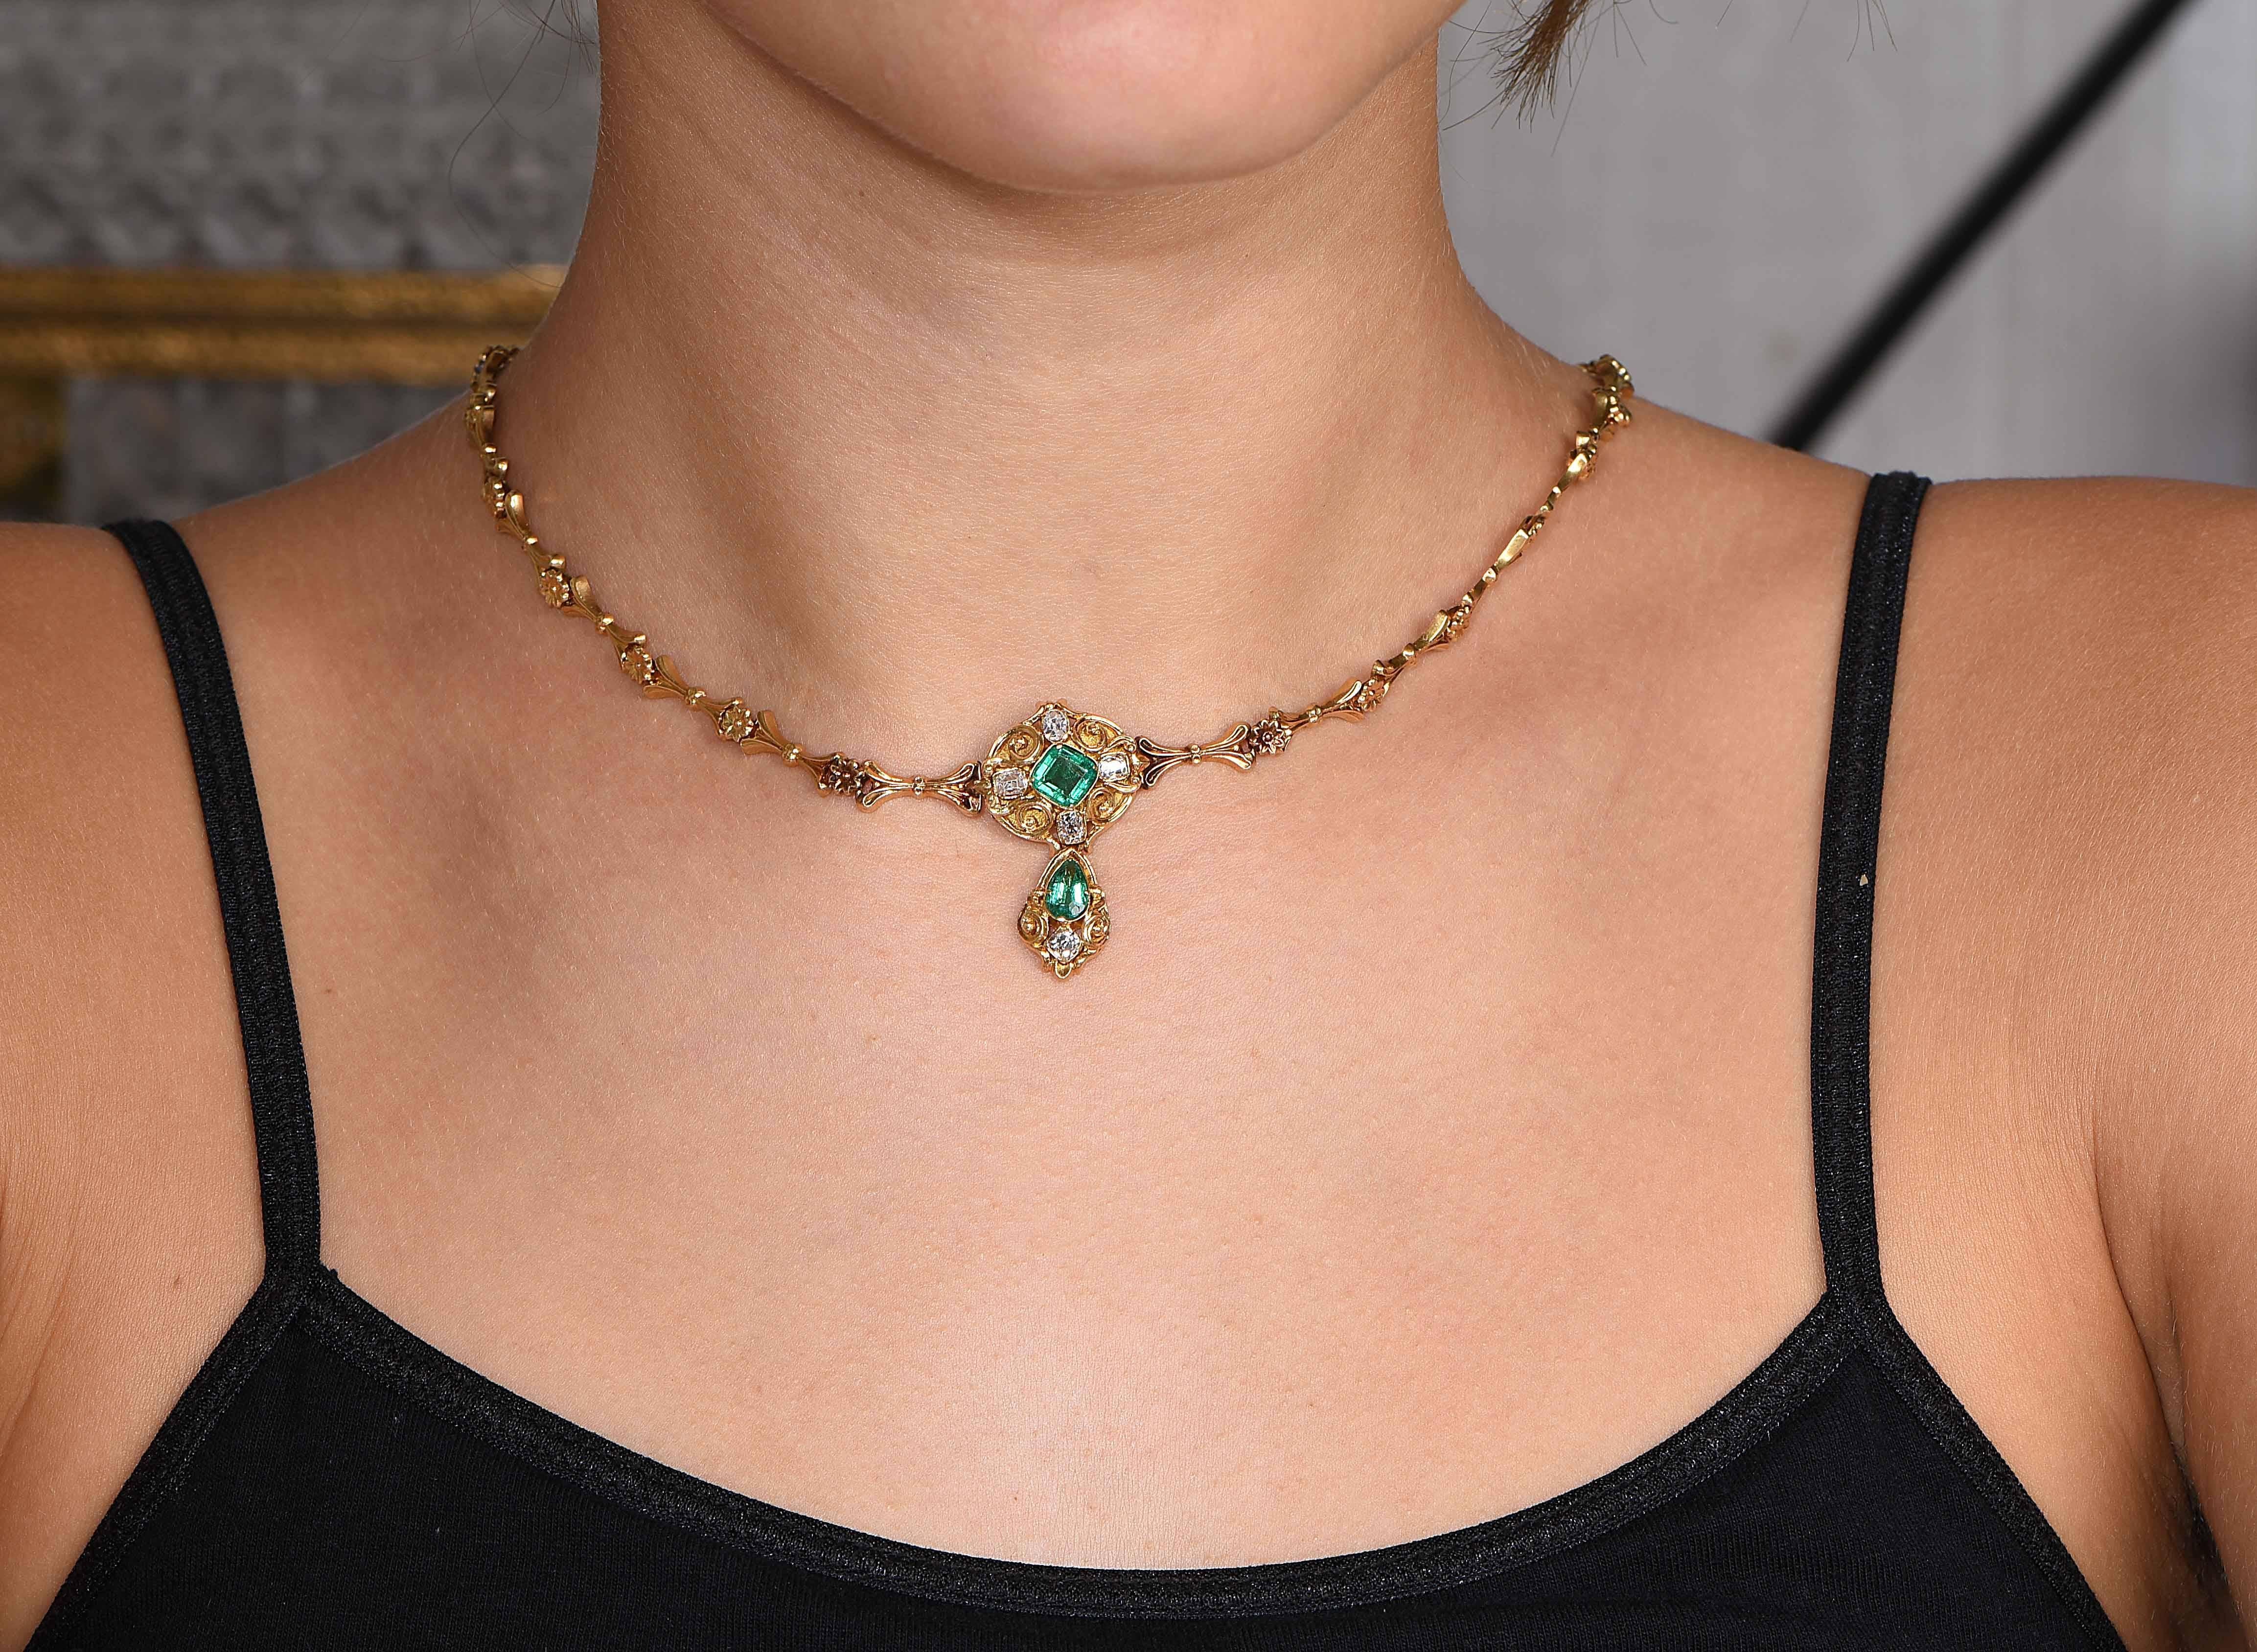 Antique gold, emerald and diamond necklace circa 1850. This necklace features One square step cut cushion cut emerald with an approximate weight of .65 carat; One step cut pear shaped emerald with an approximate weight of .40 carat; 5 cushion shaped